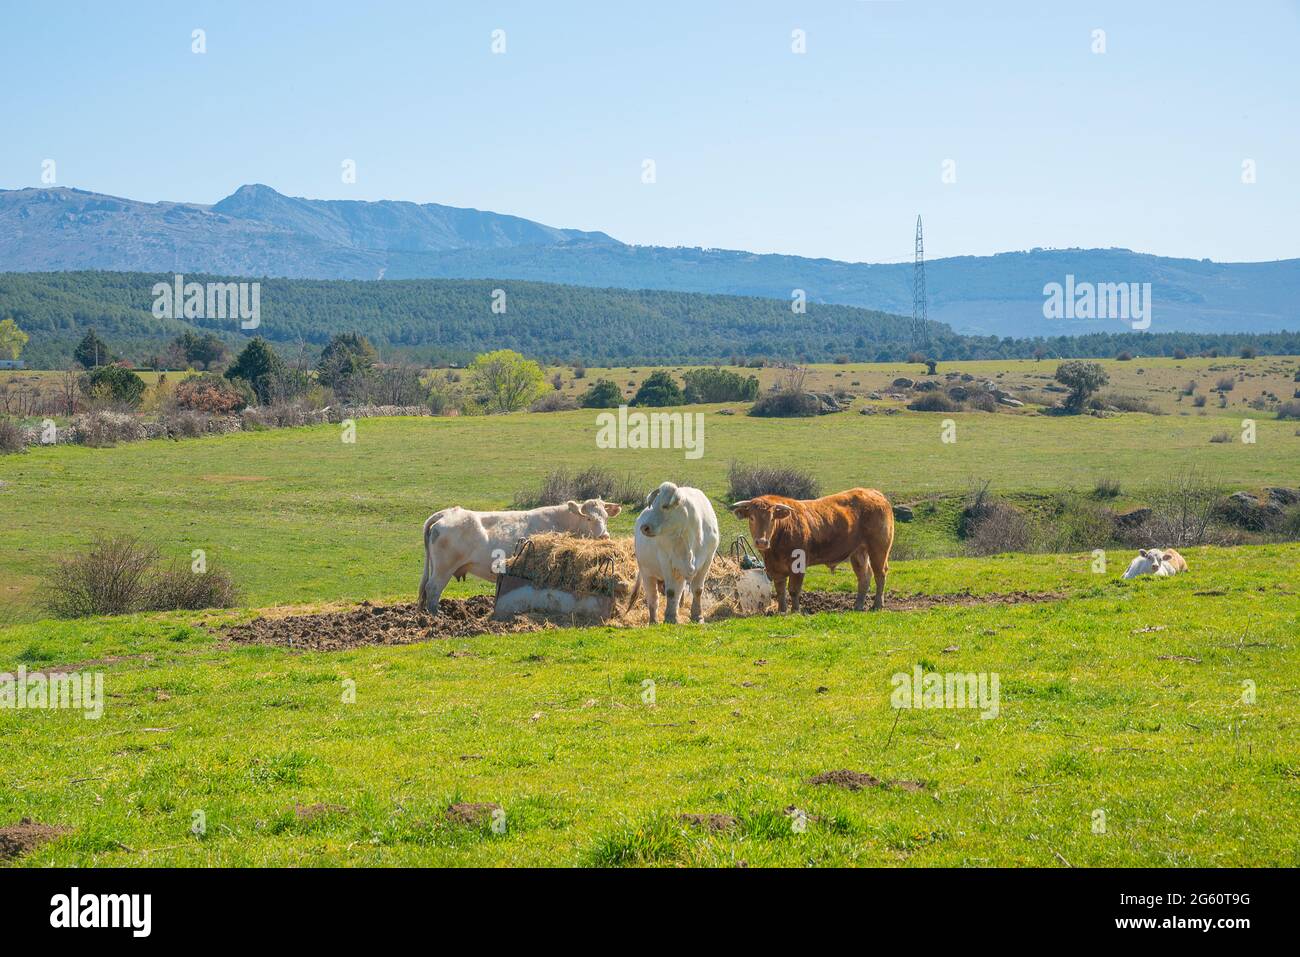 Cows in a meadow. Gandullas, Madrid province, Spain. Stock Photo